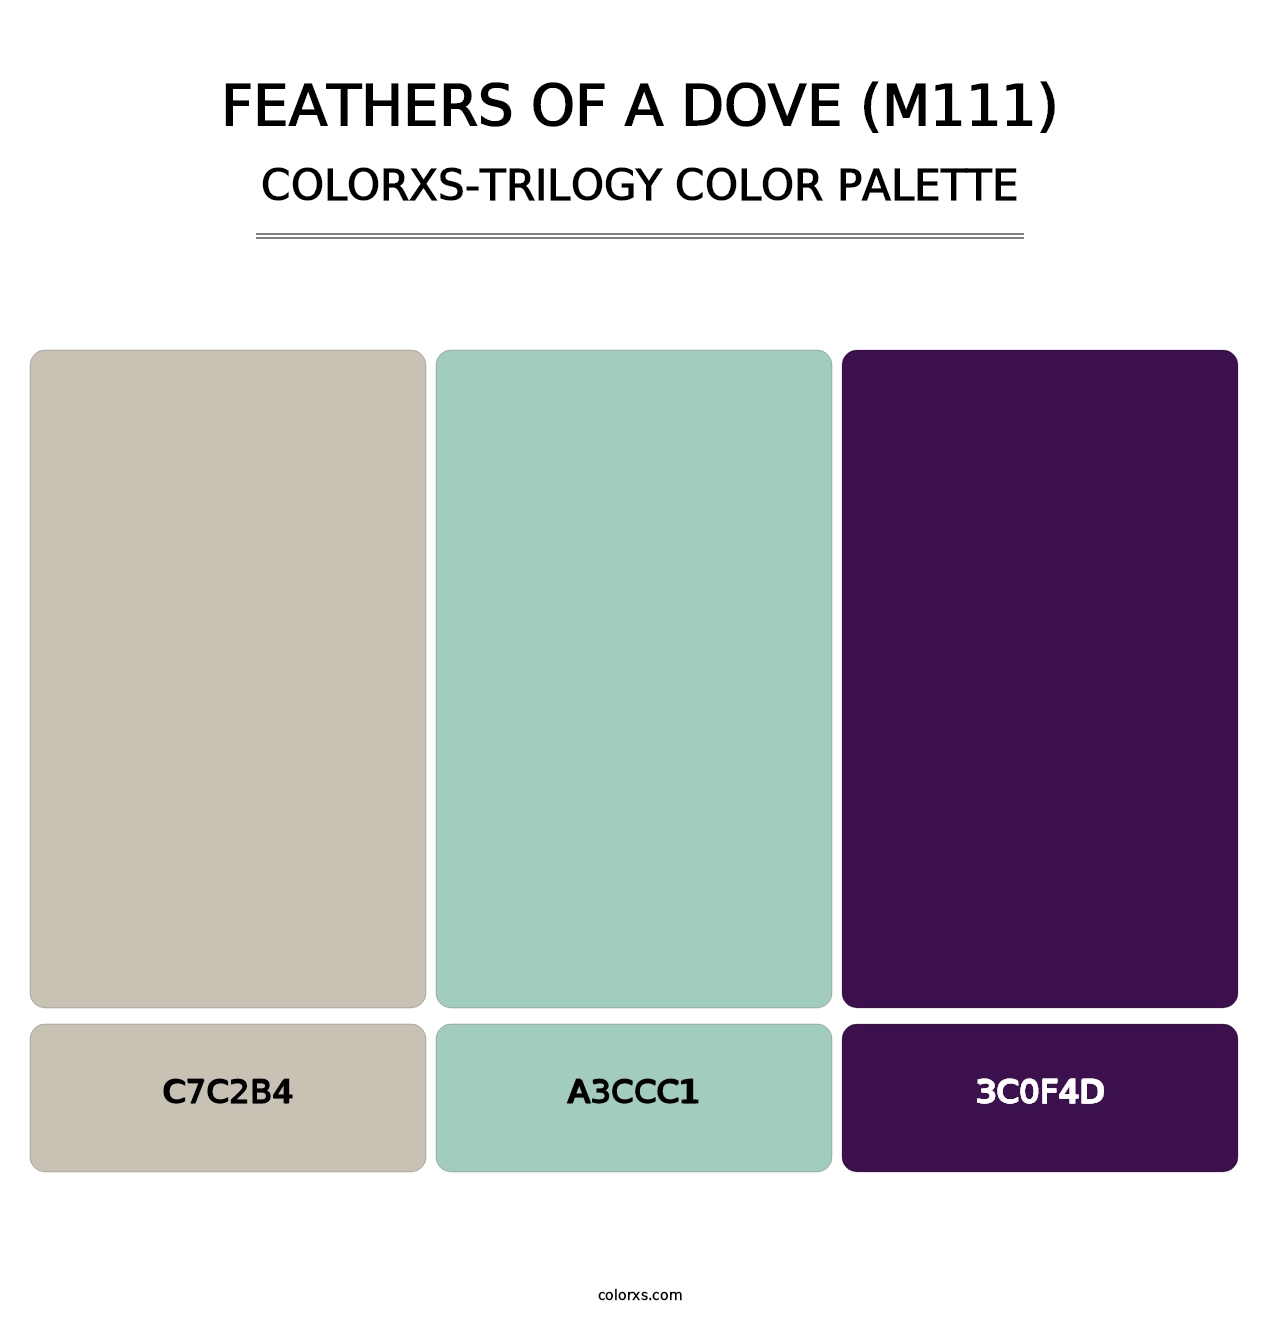 Feathers of a Dove (M111) - Colorxs Trilogy Palette